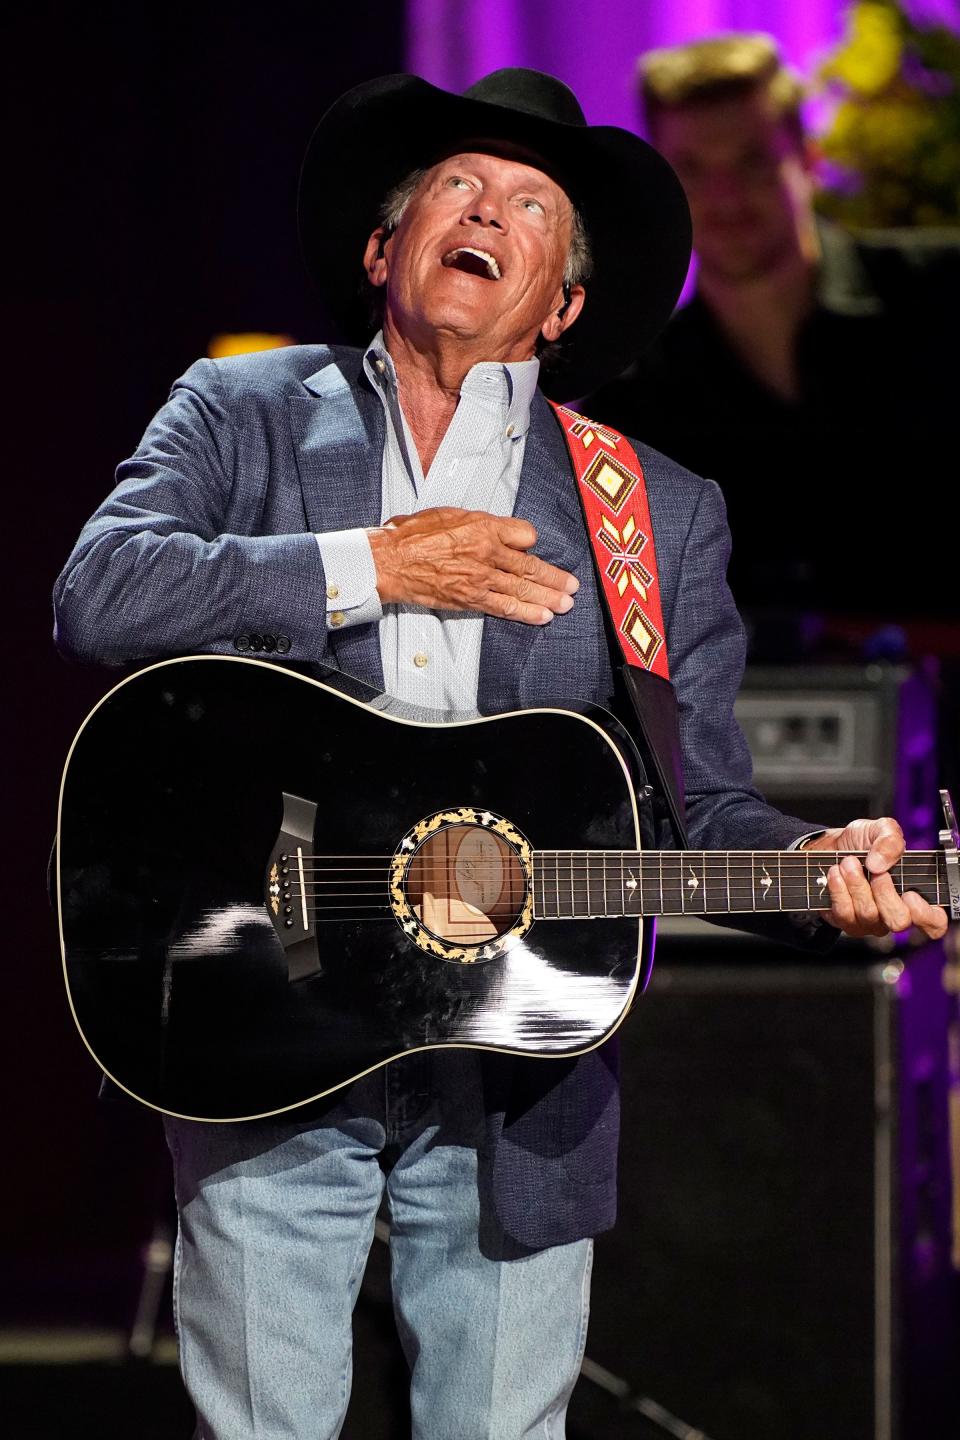 George Strait (pictured here performing during "Coal Miner's Daughter: A Celebration of the Life & Music of Loretta Lynn" memorial concert at Grand Ole Opry House Sunday, Oct. 30, 2022 in Nashville, Tenn.) will play Raymond James Stadium on Aug. 5.